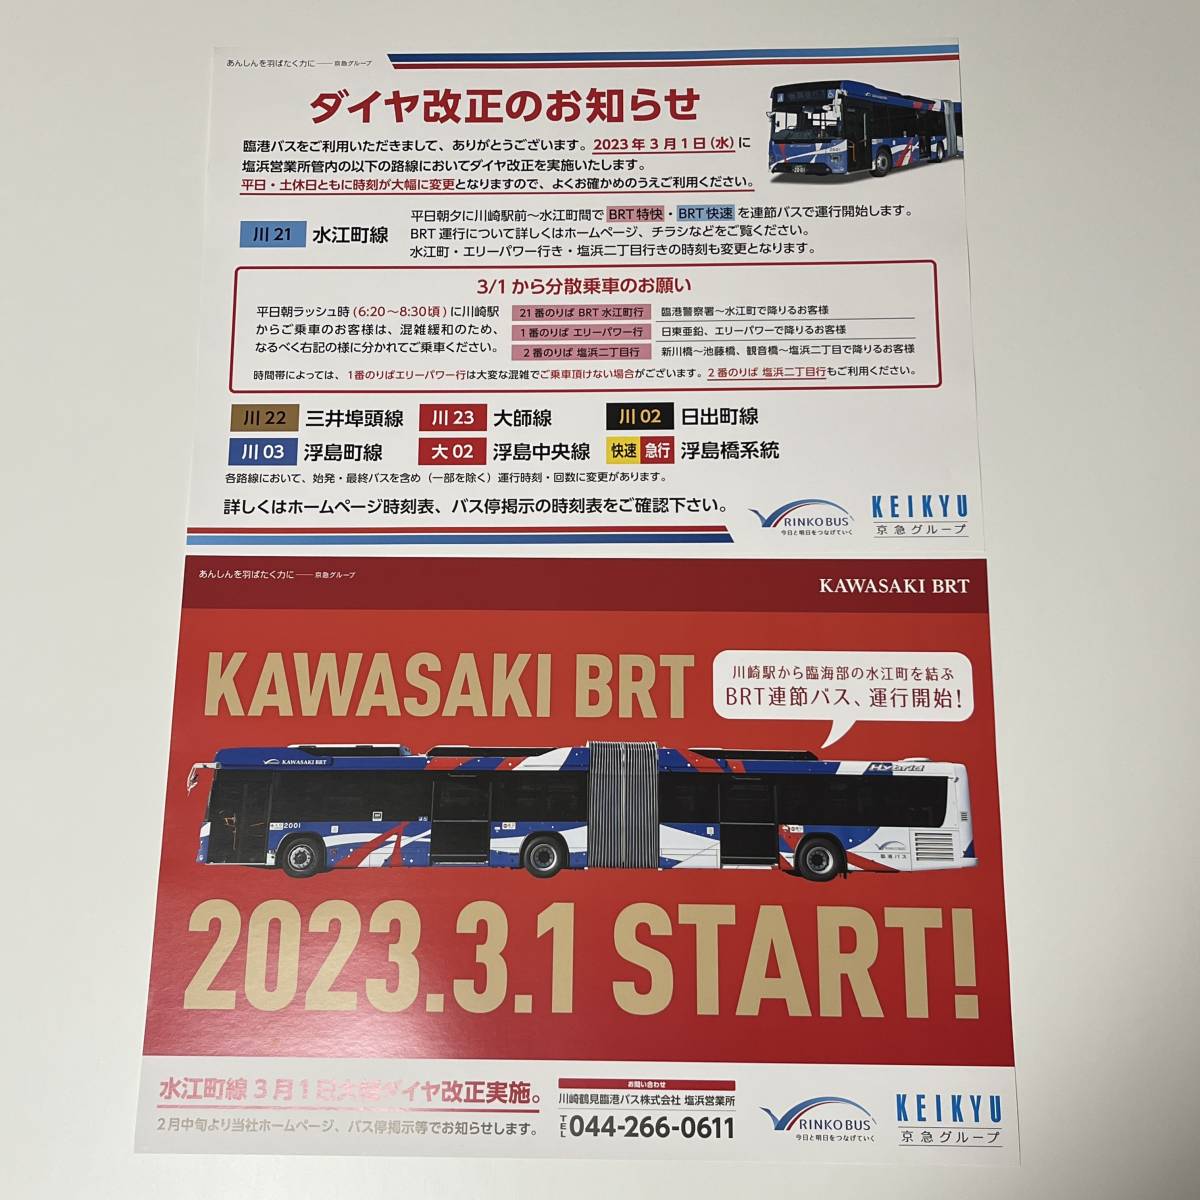  Kawasaki Tsurumi .. bus in car poster 4 pieces set window on advertisement middle hanging advertisement diamond modified regular,BRT, fare table condition excellent 